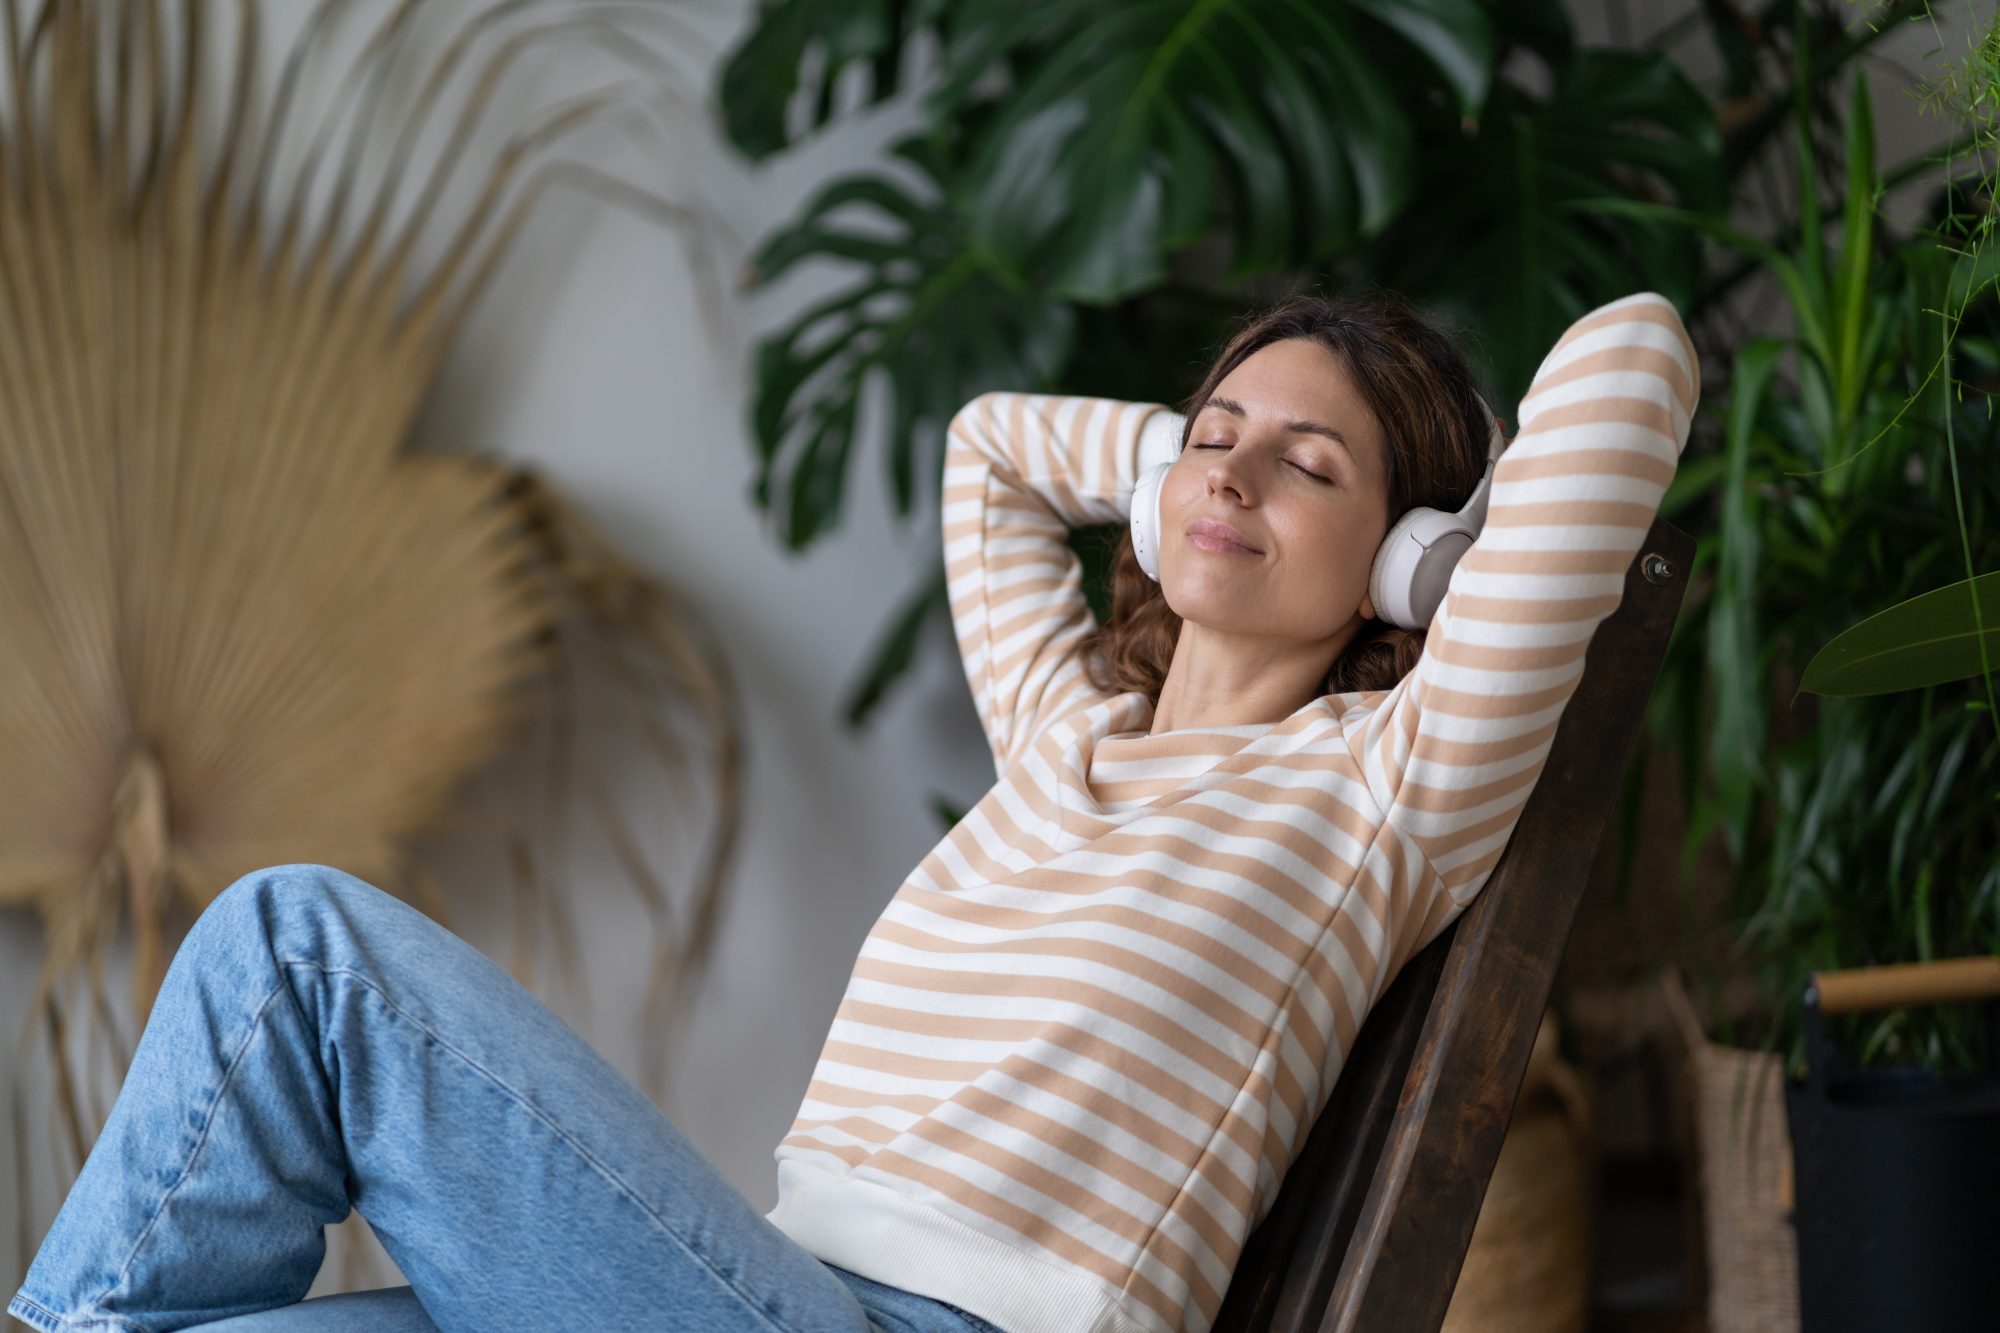 Woman relaxing on a break whilst working from home, listening to music, leaning back in chair, plants visible in background